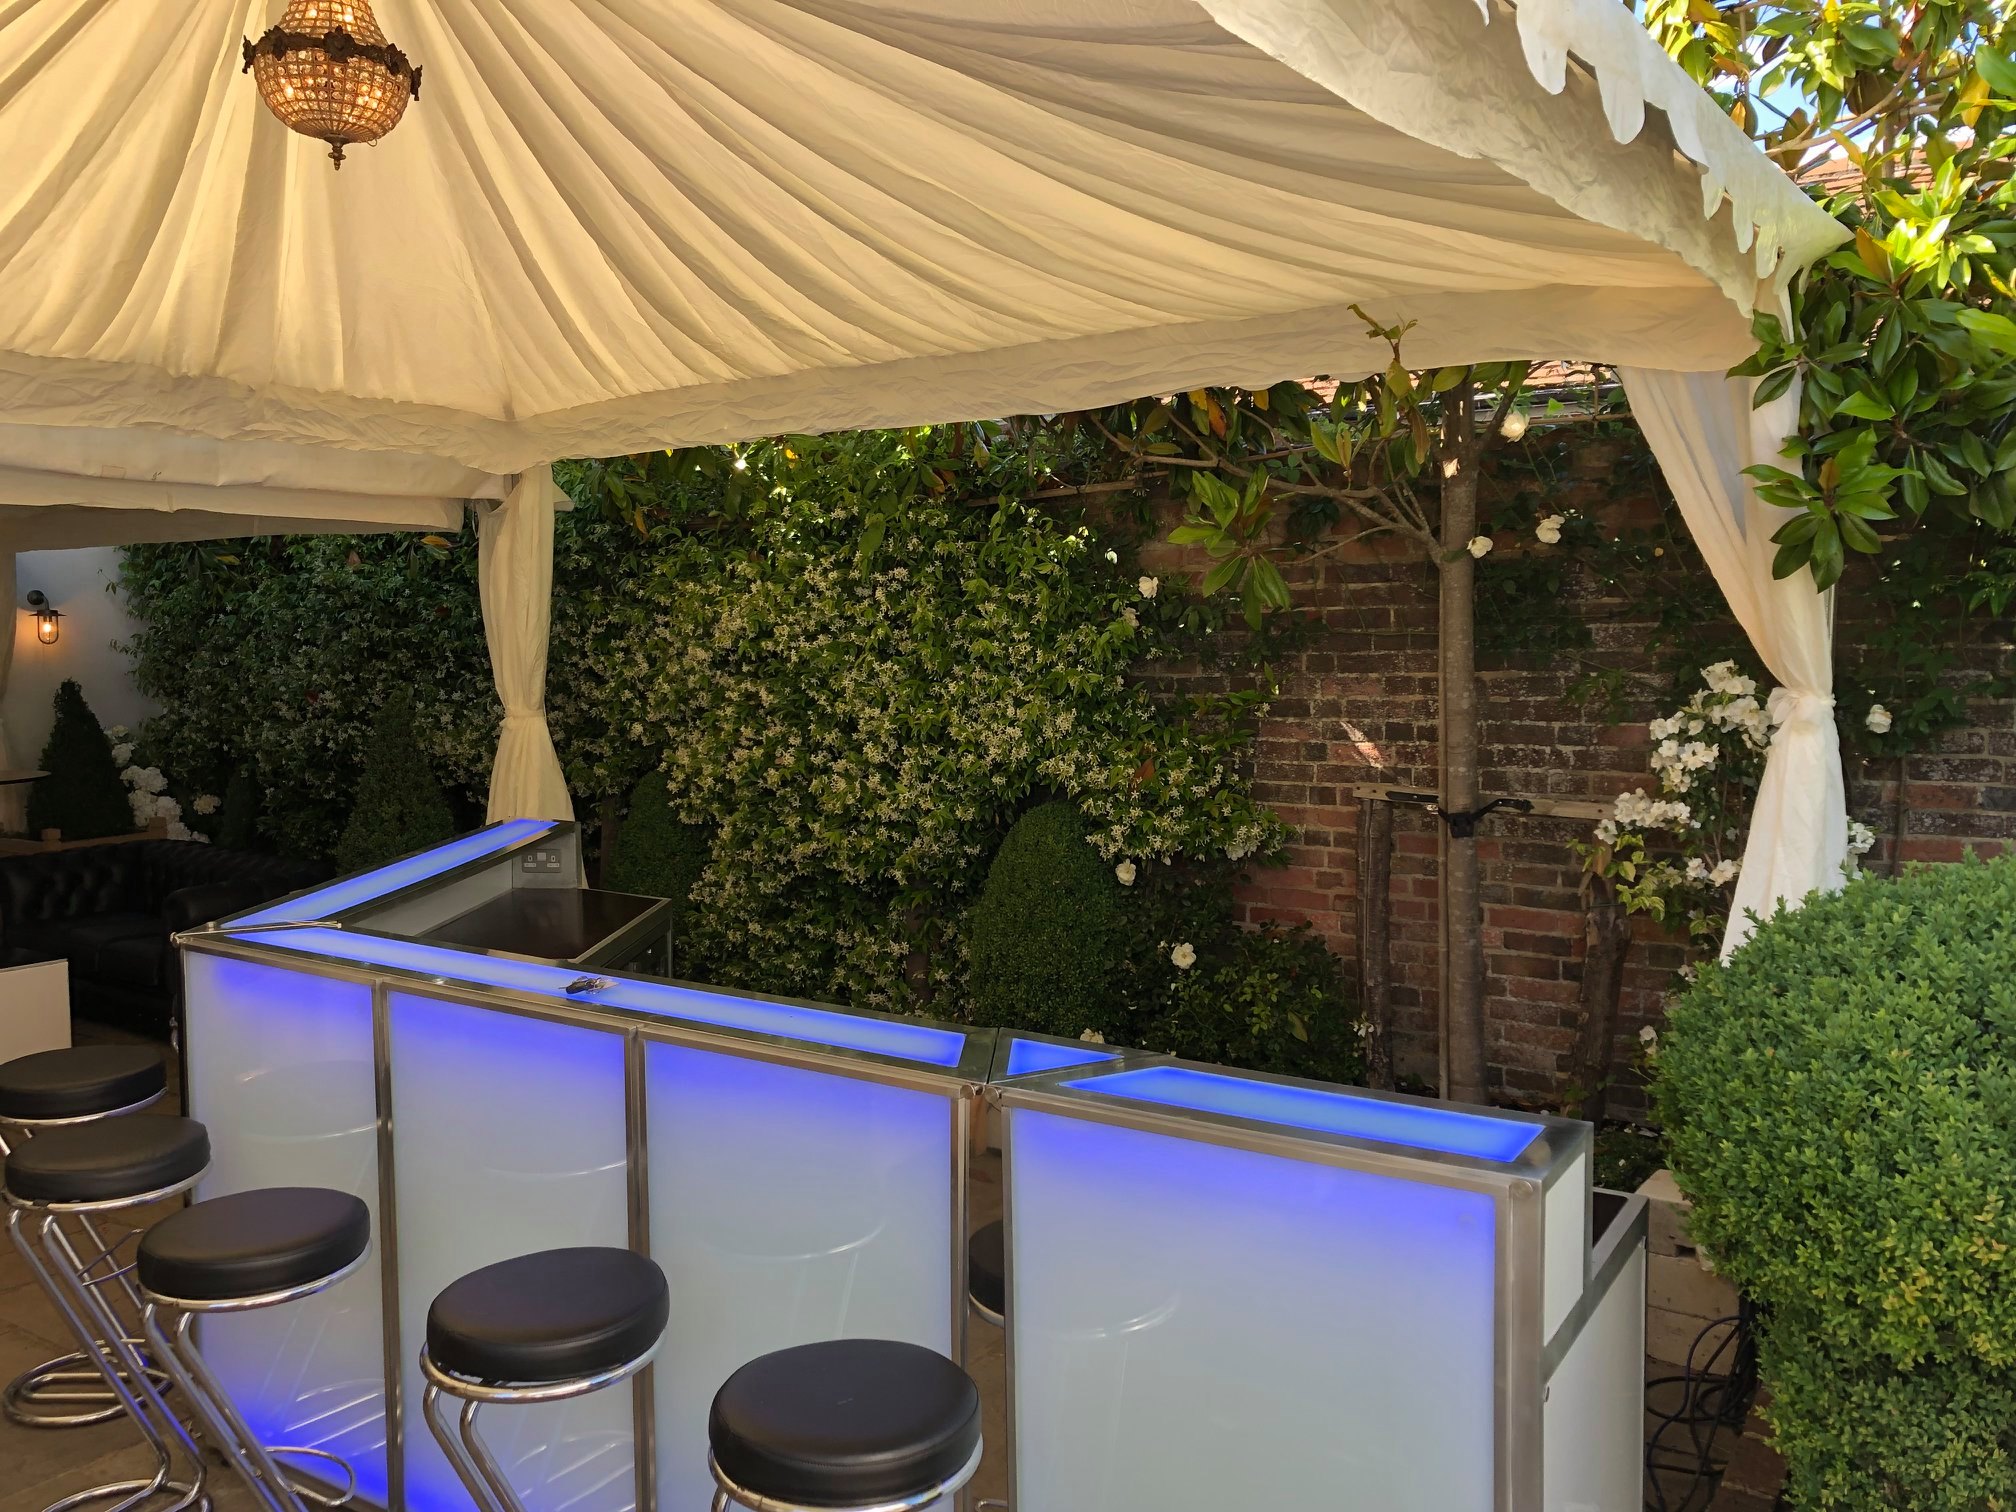 4.0m "Swoosh" bespoke Modular Bar in Blue Led from Ice & Lime - 250 guests